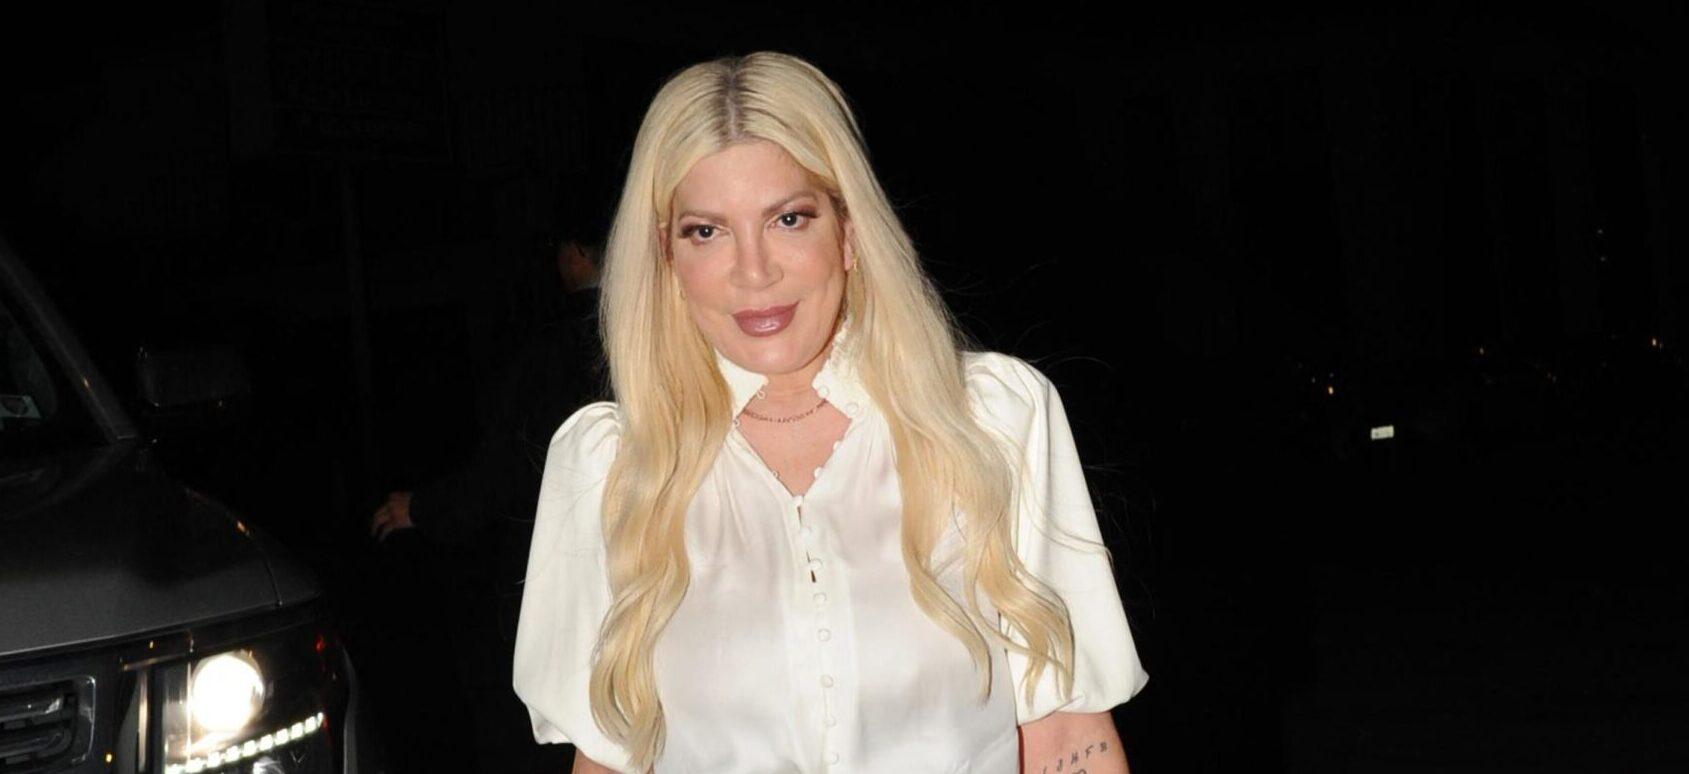 Tori Spelling Living In $18,000 Per Month Home After Armed Neighbor Drama